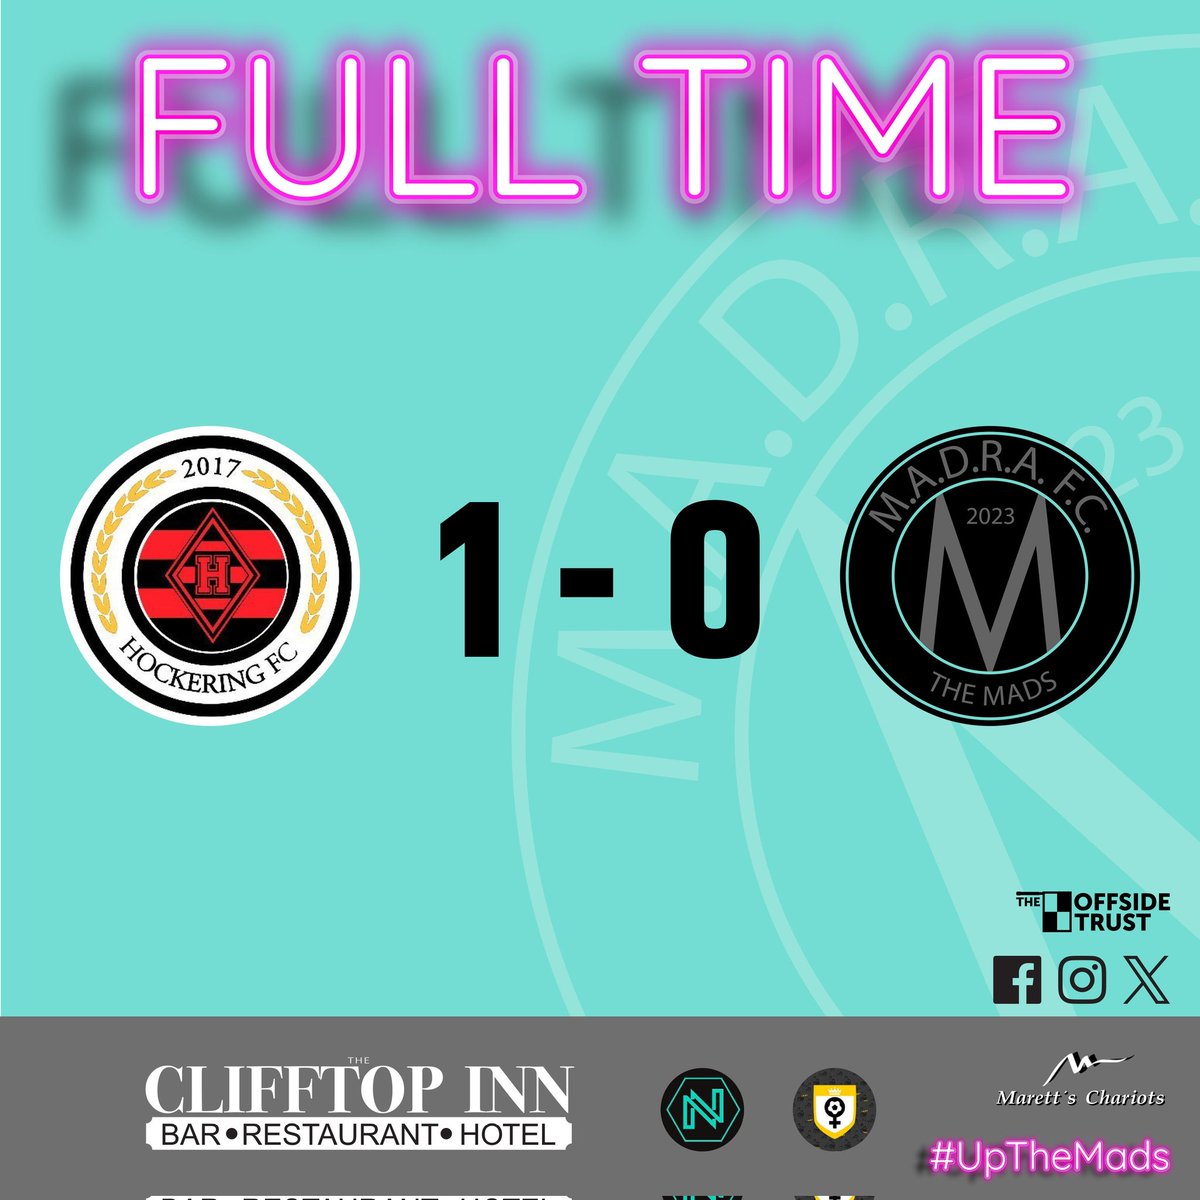 Today's game was moved to MADRA due to a water logged pitch.
Women lost by just 1 goal to 2nd place Hockering.
#UpTheMads #WelcomeToTheMadhouse #Madness #TheMads #MadraFC #NorfolkFootball #OneStepBeyond